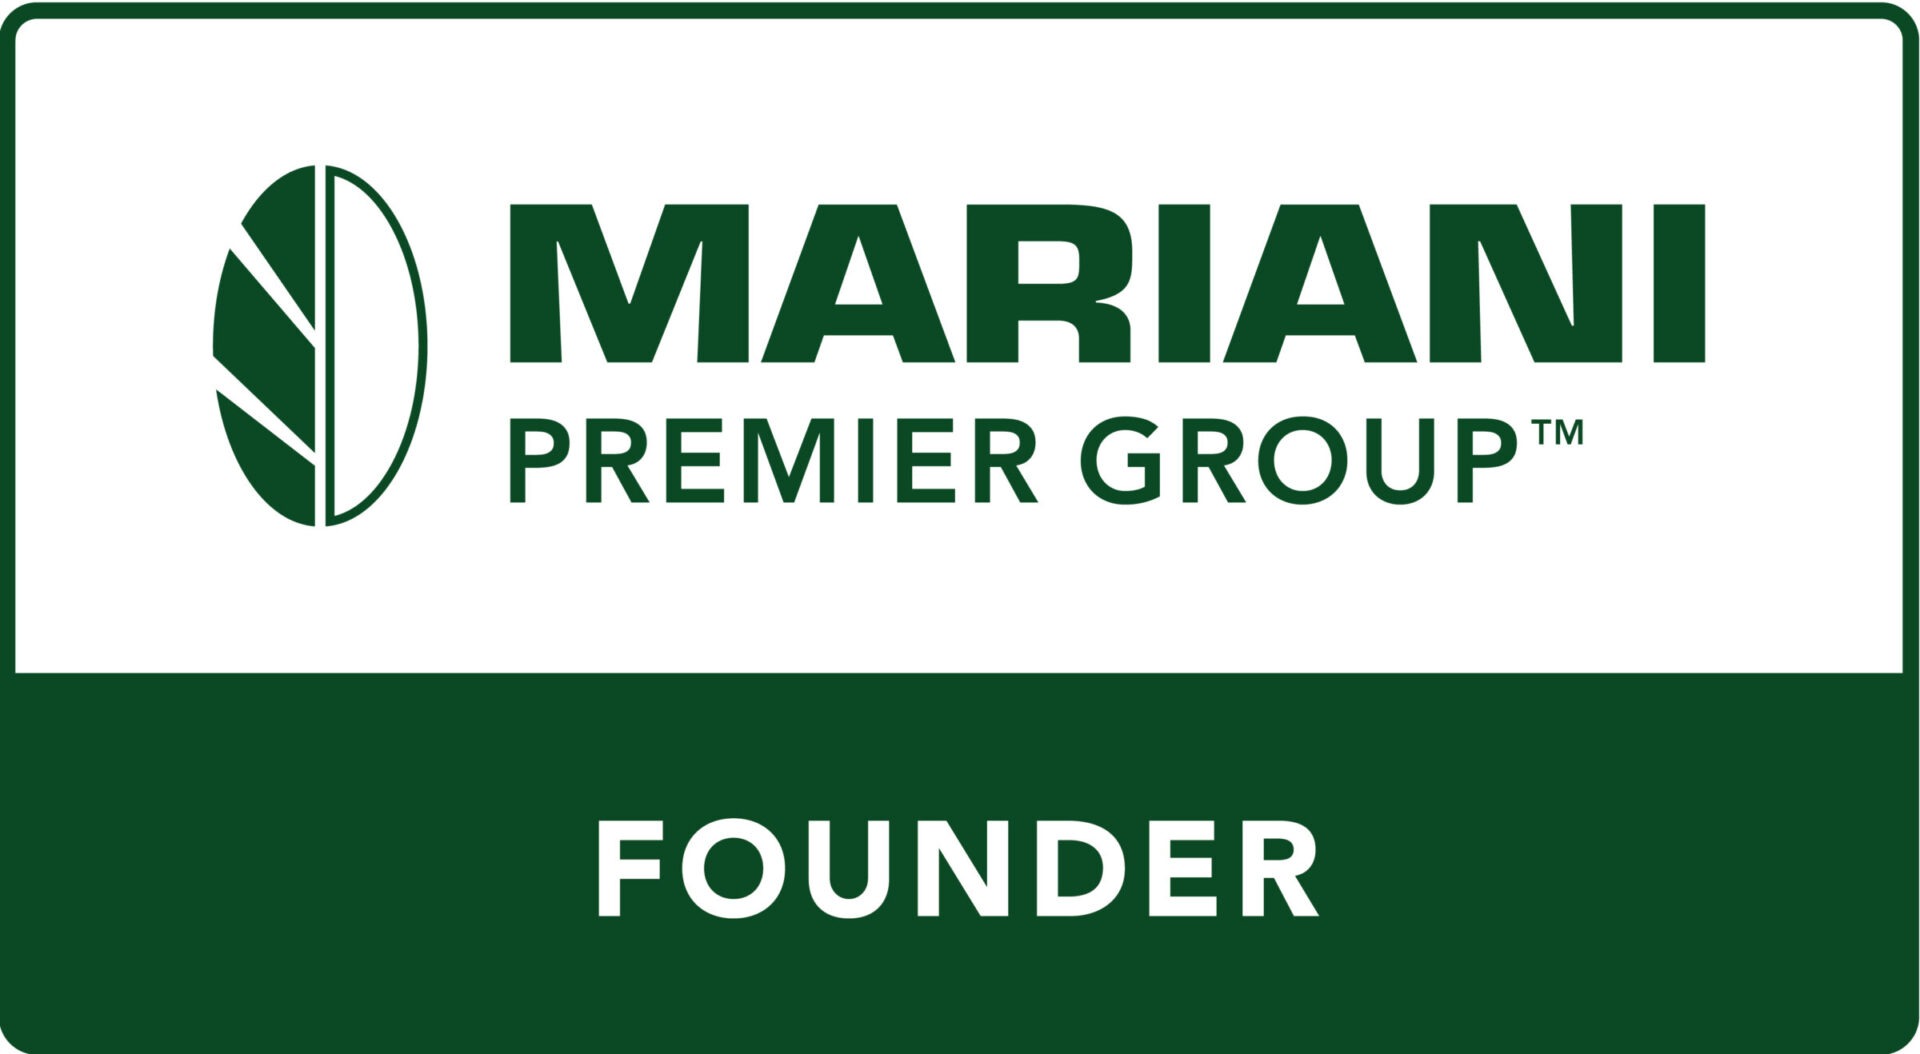 The image displays a logo for "MARIANI PREMIER GROUP" with a stylized leaf graphic, a trademark symbol, and the word "FOUNDER" below in a green banner.